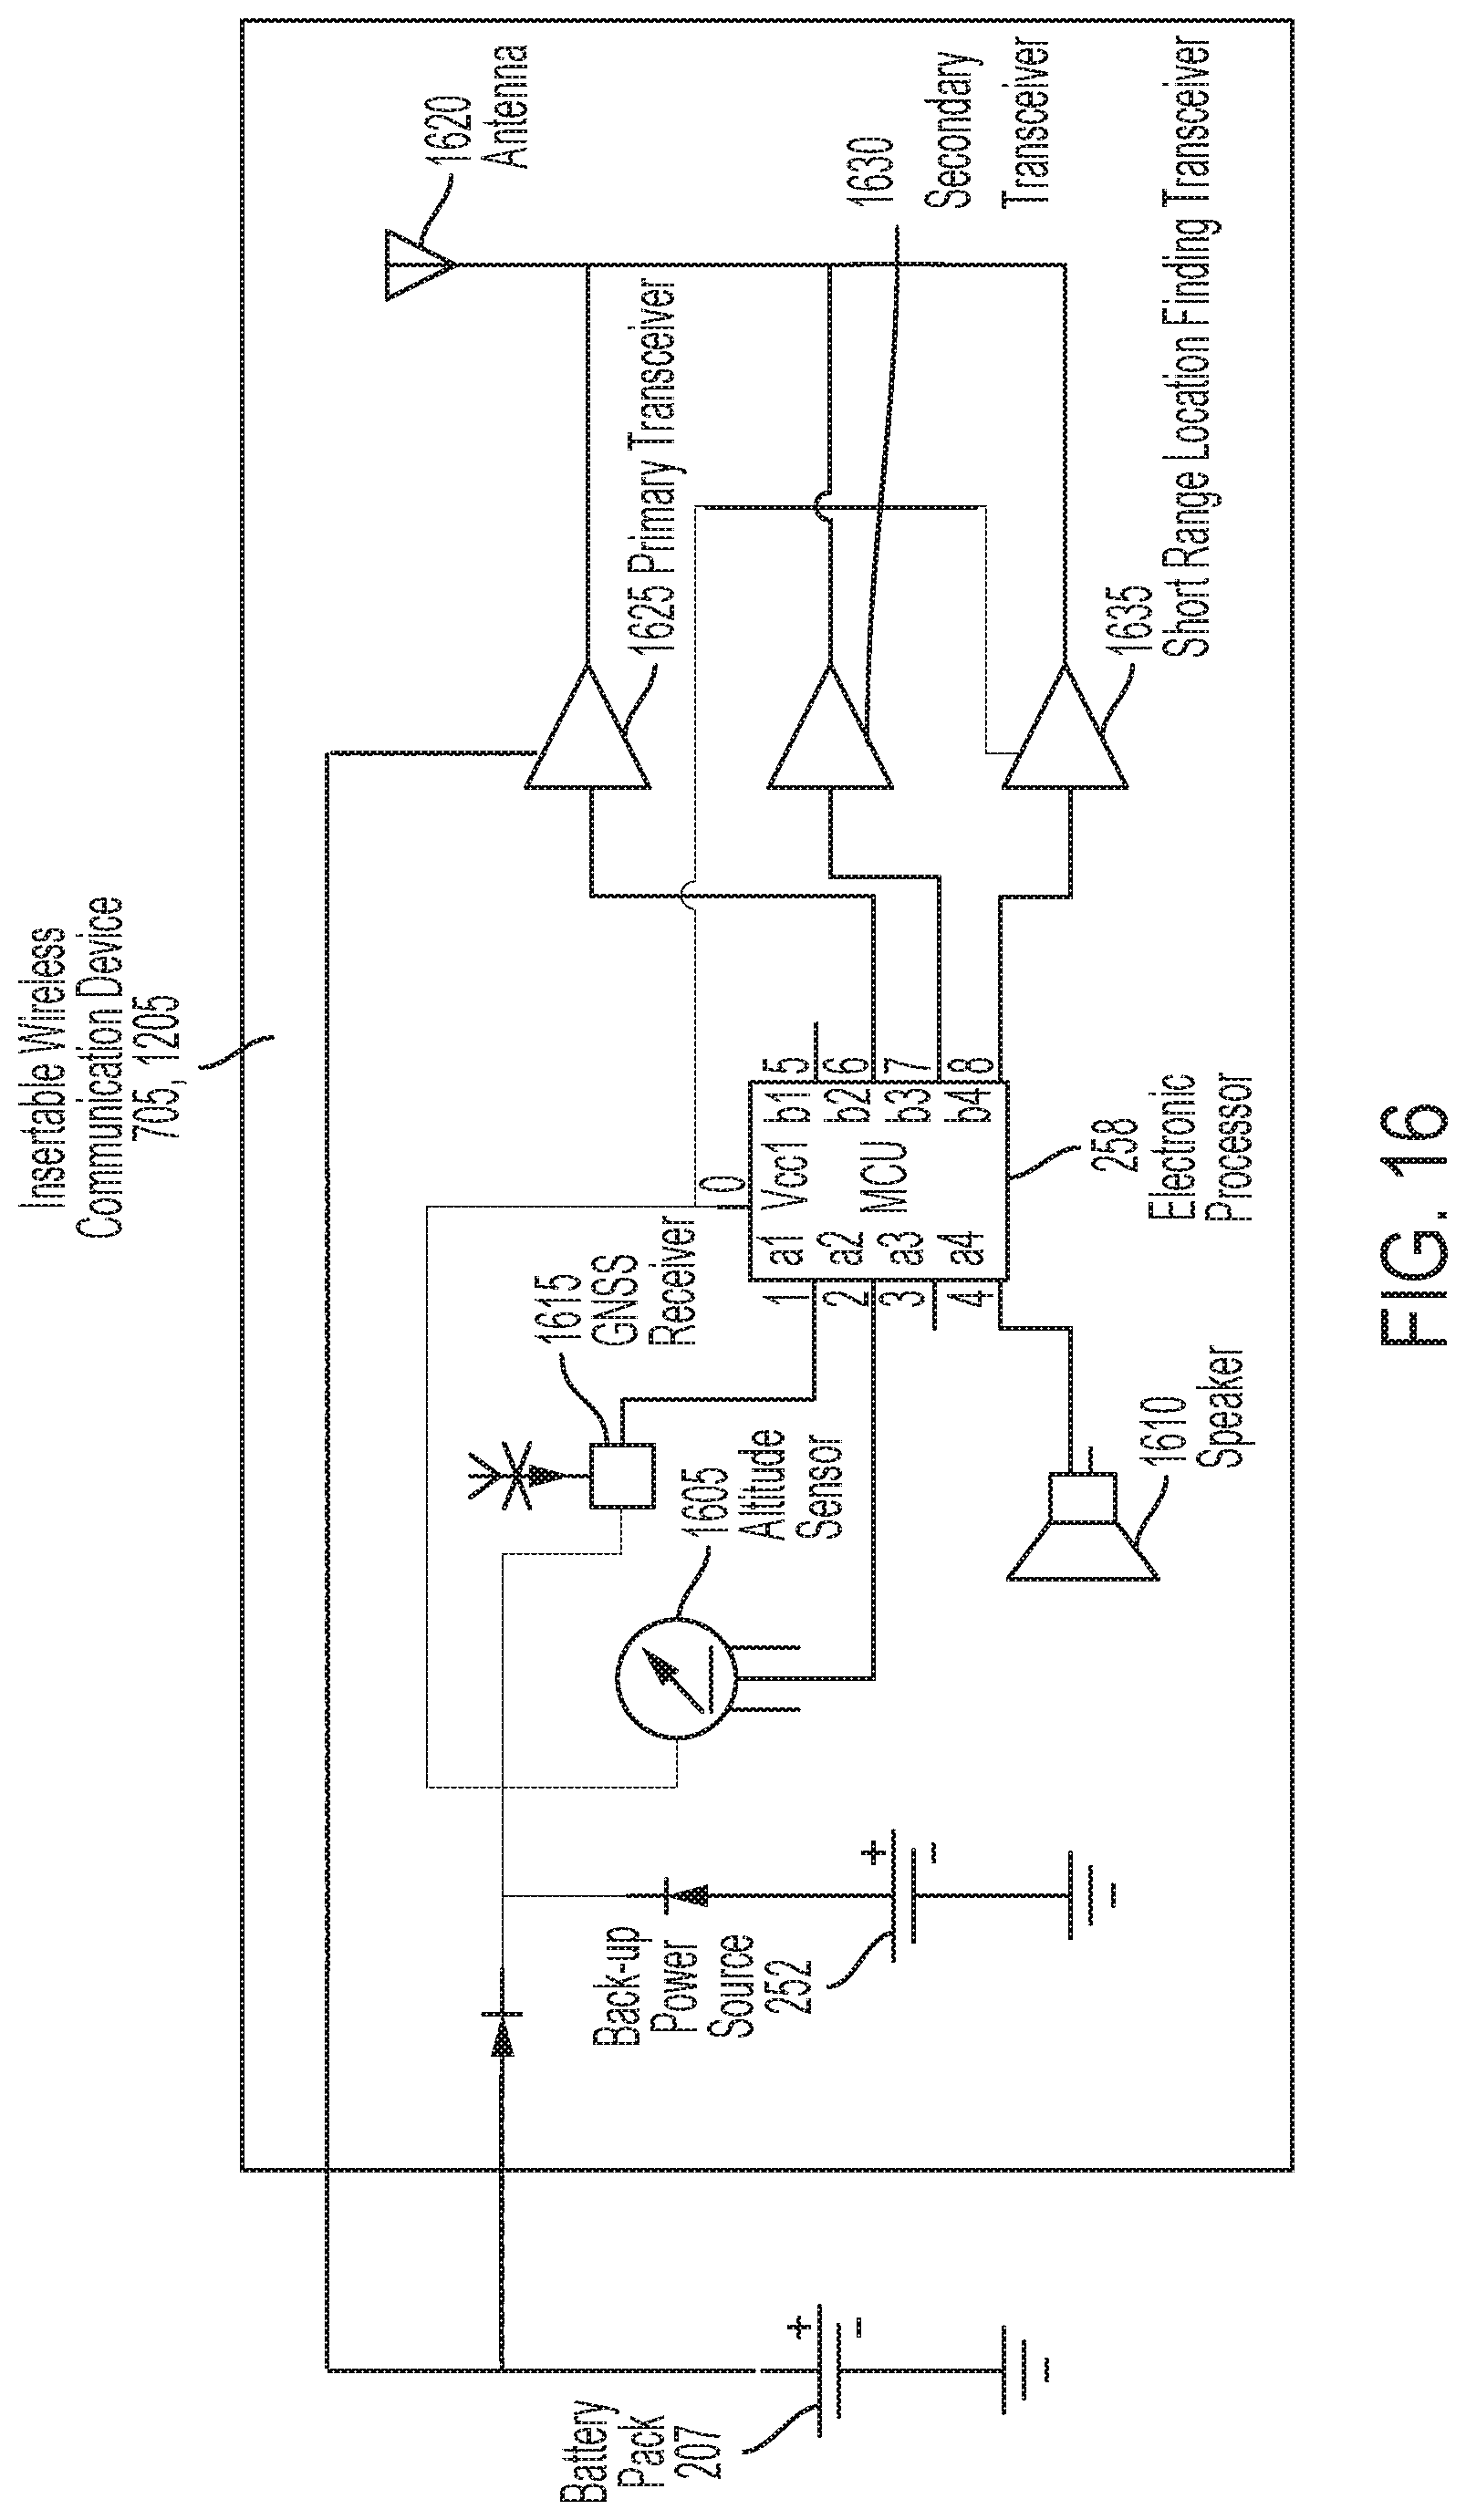 Power Tool With Shared Terminal Block Kind Code [MILWAUKEE ELECTRIC TOOL  CORPORATION]